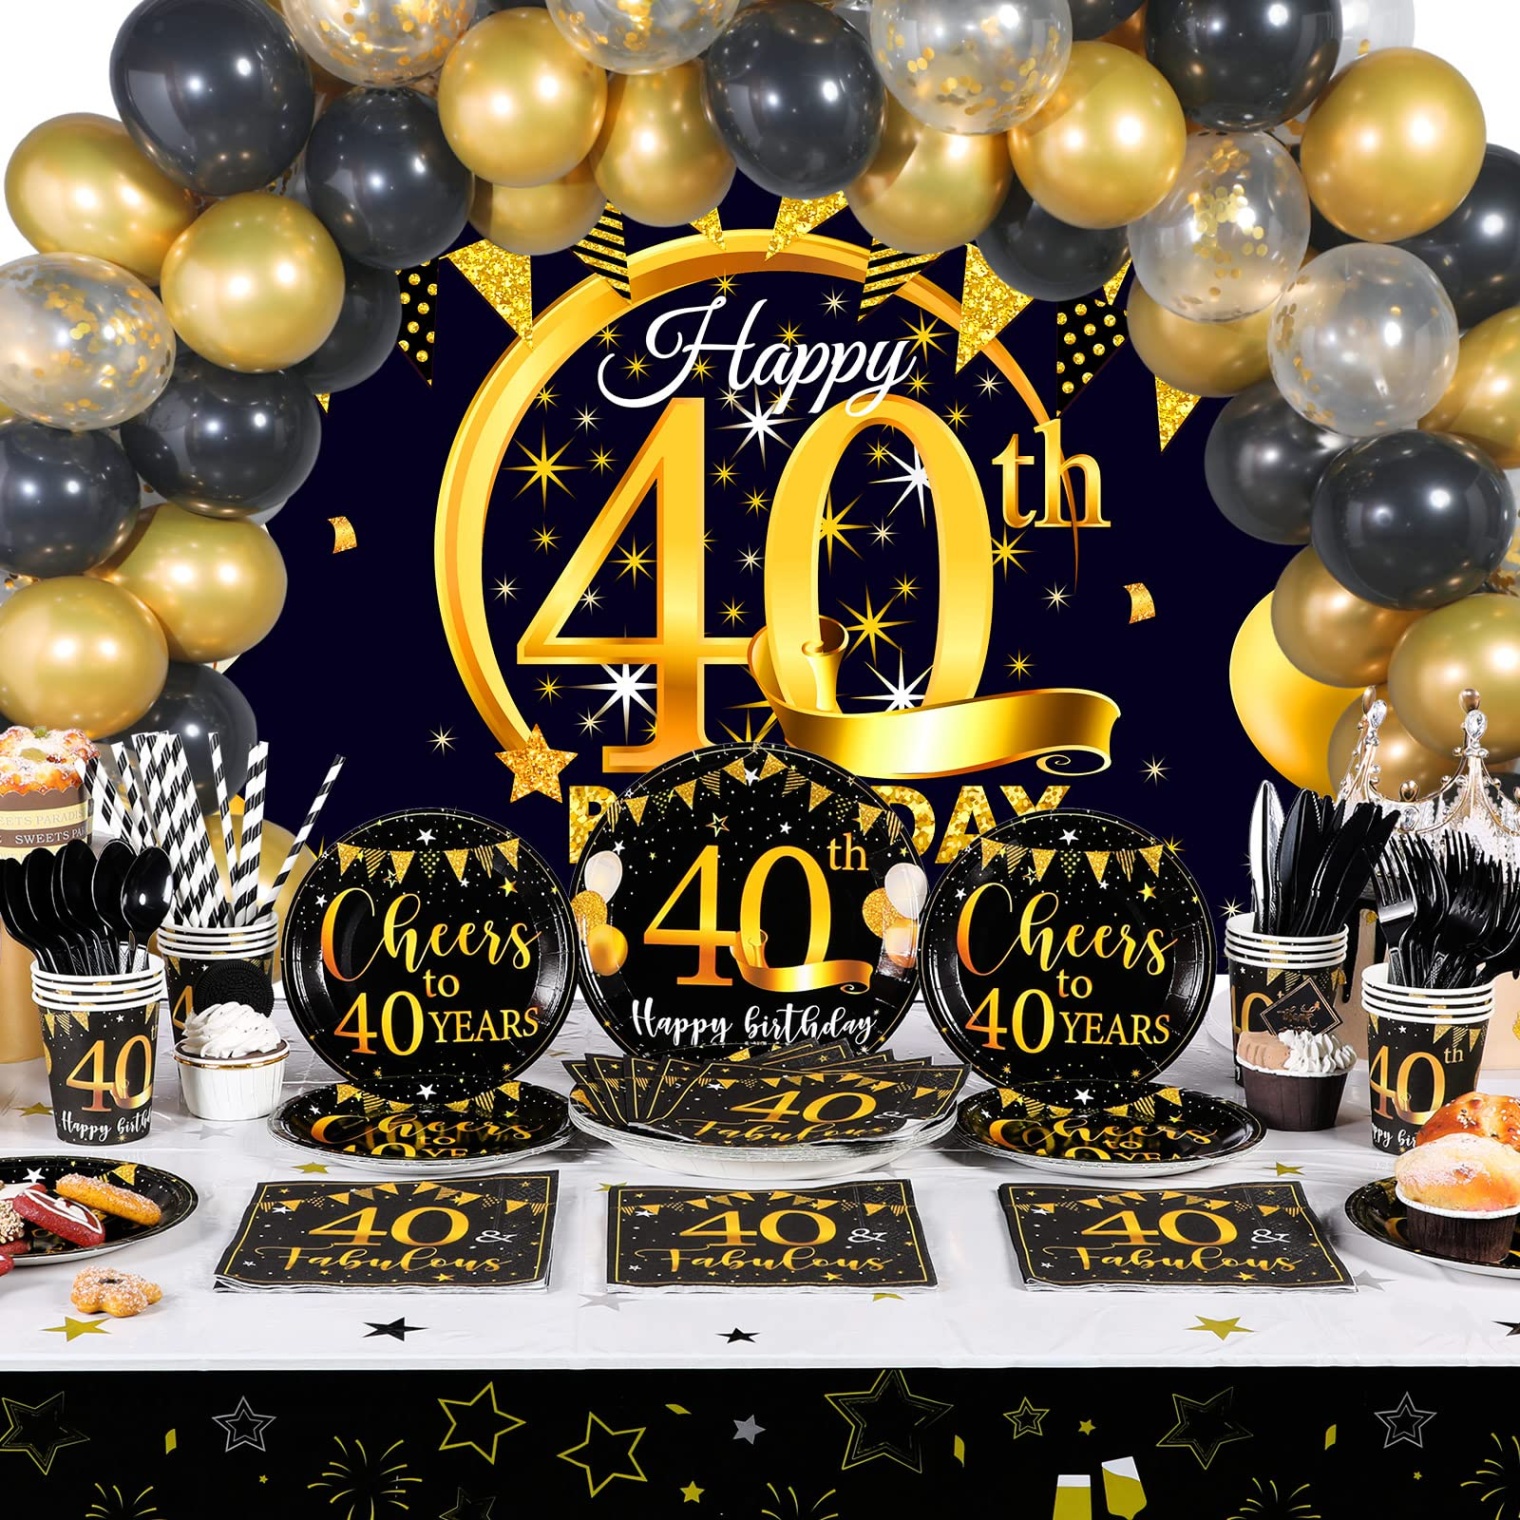 40th birthday decor for him Bulan 1 Birthday Decorations for Men, Black and Gold Anniversary Decorations  Birthday Balloons Tablecloth Tableware Serves Guests for Women (th  Birthday